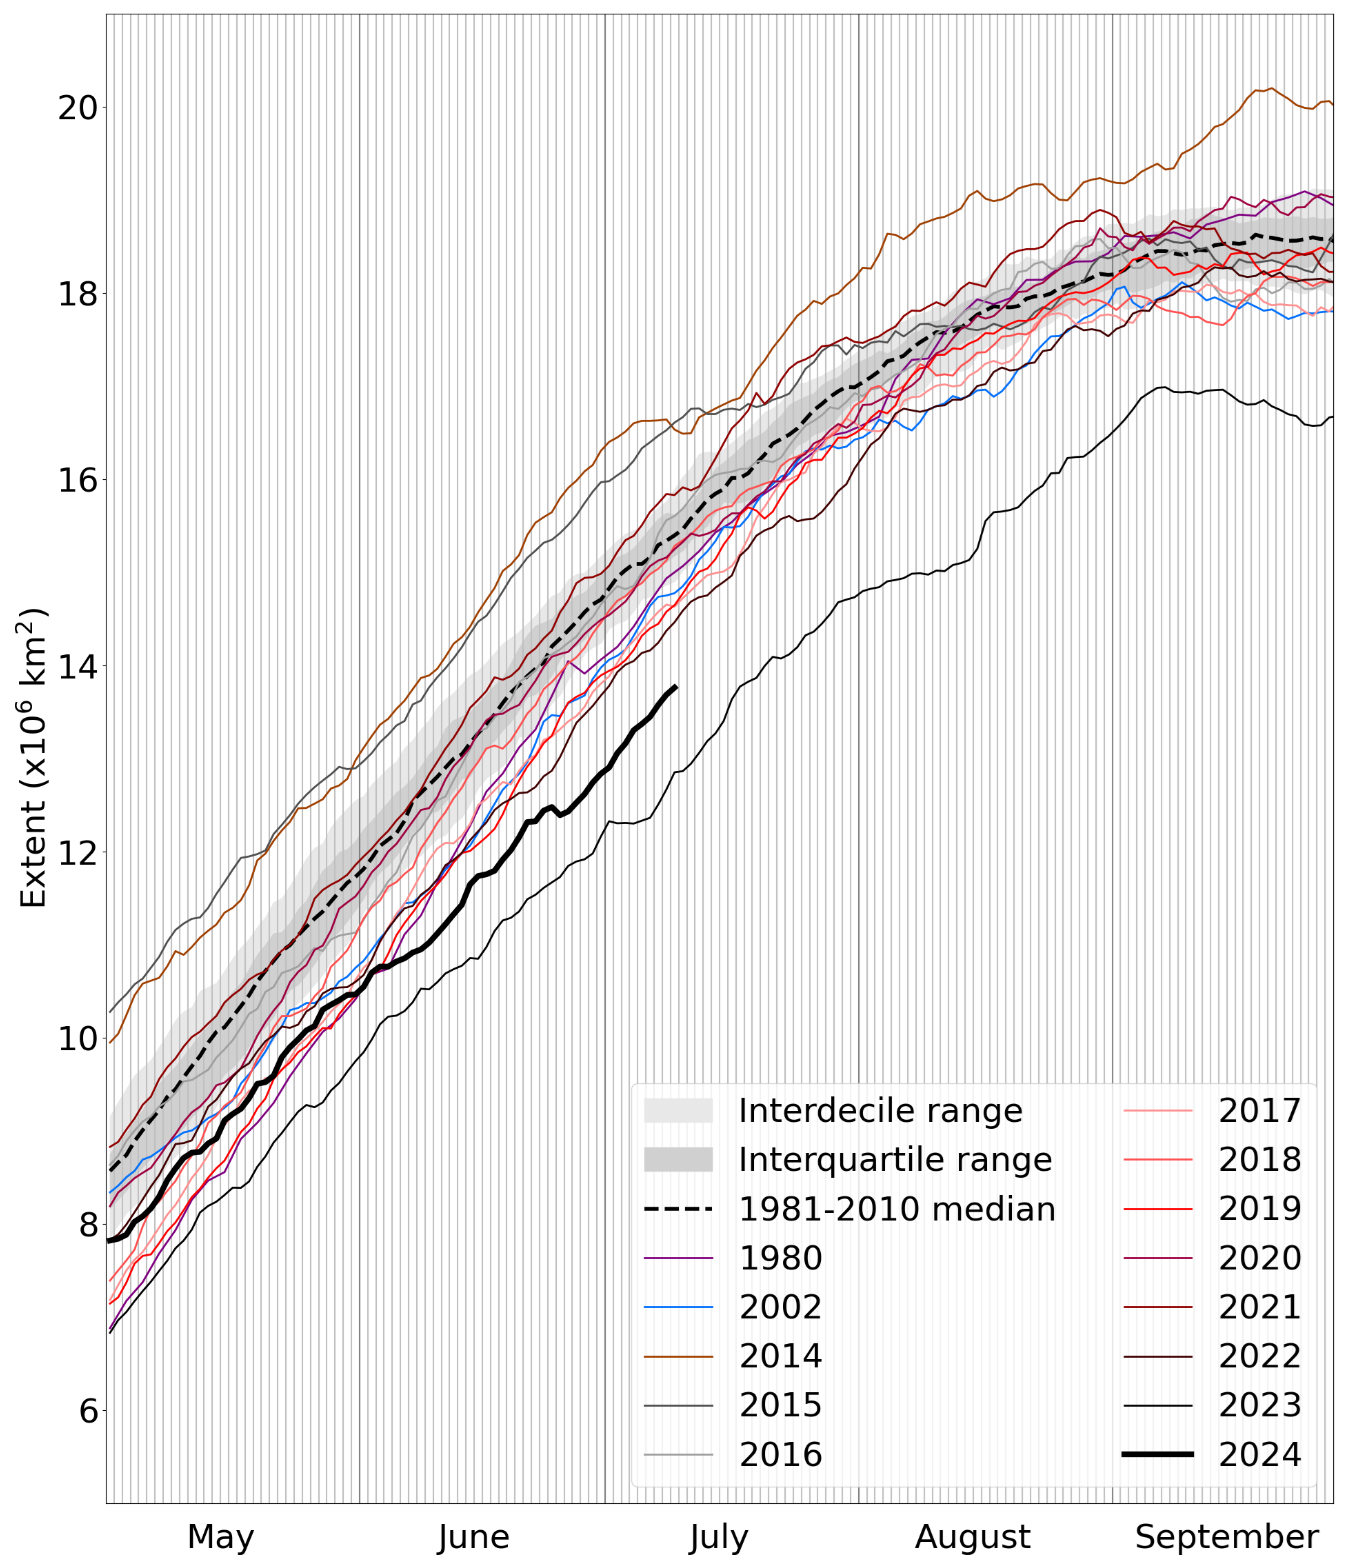 Daily Antarctic sea ice extent for 2024, compared with recent years, selected historic years with low ice cover, and the 1981-2010 average, with interquartile and interdecile ranges indicated by the shaded areas. Data are from NSIDC.